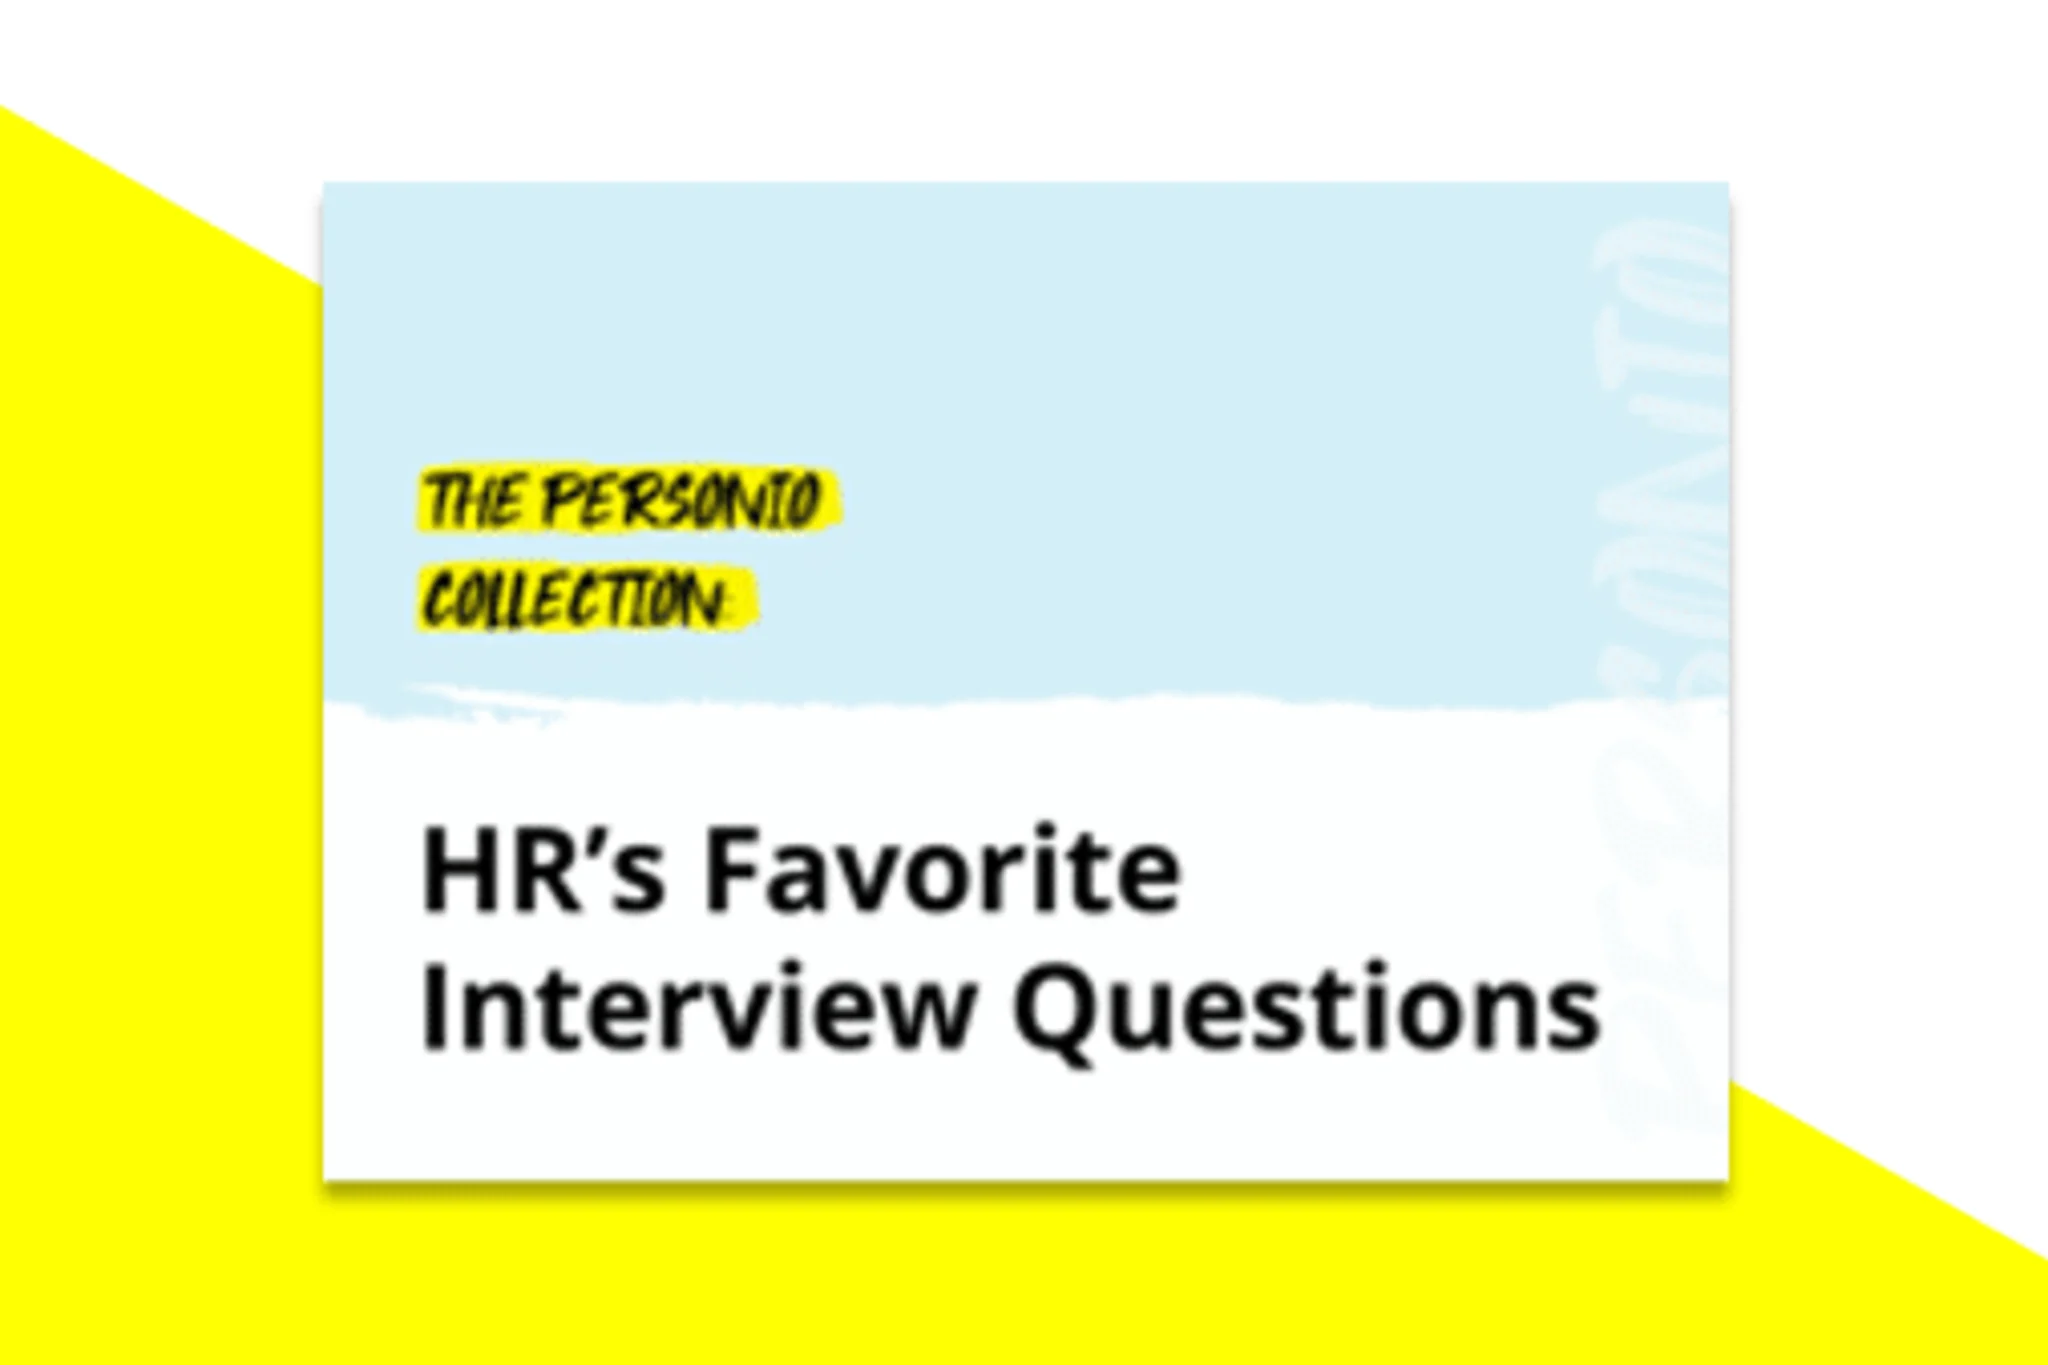 87 of HR's favorite interview questions for you